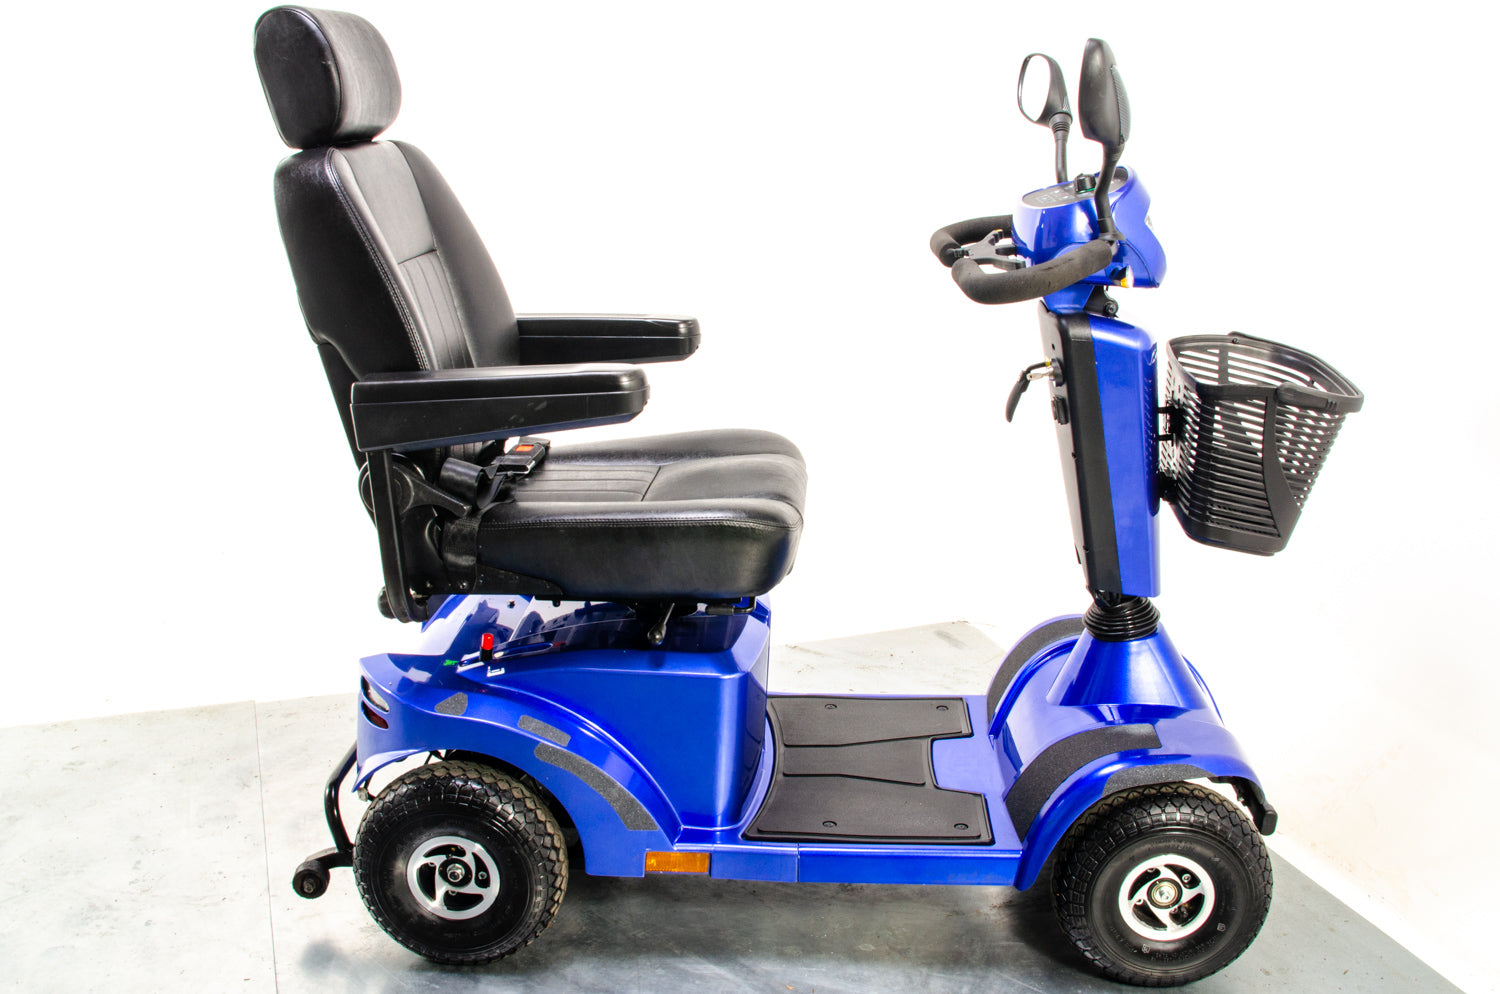 Sunrise Medical Sterling S425 Used Mobility Scooter 8mph Blue Midsize Pneumatic Pavement 13331